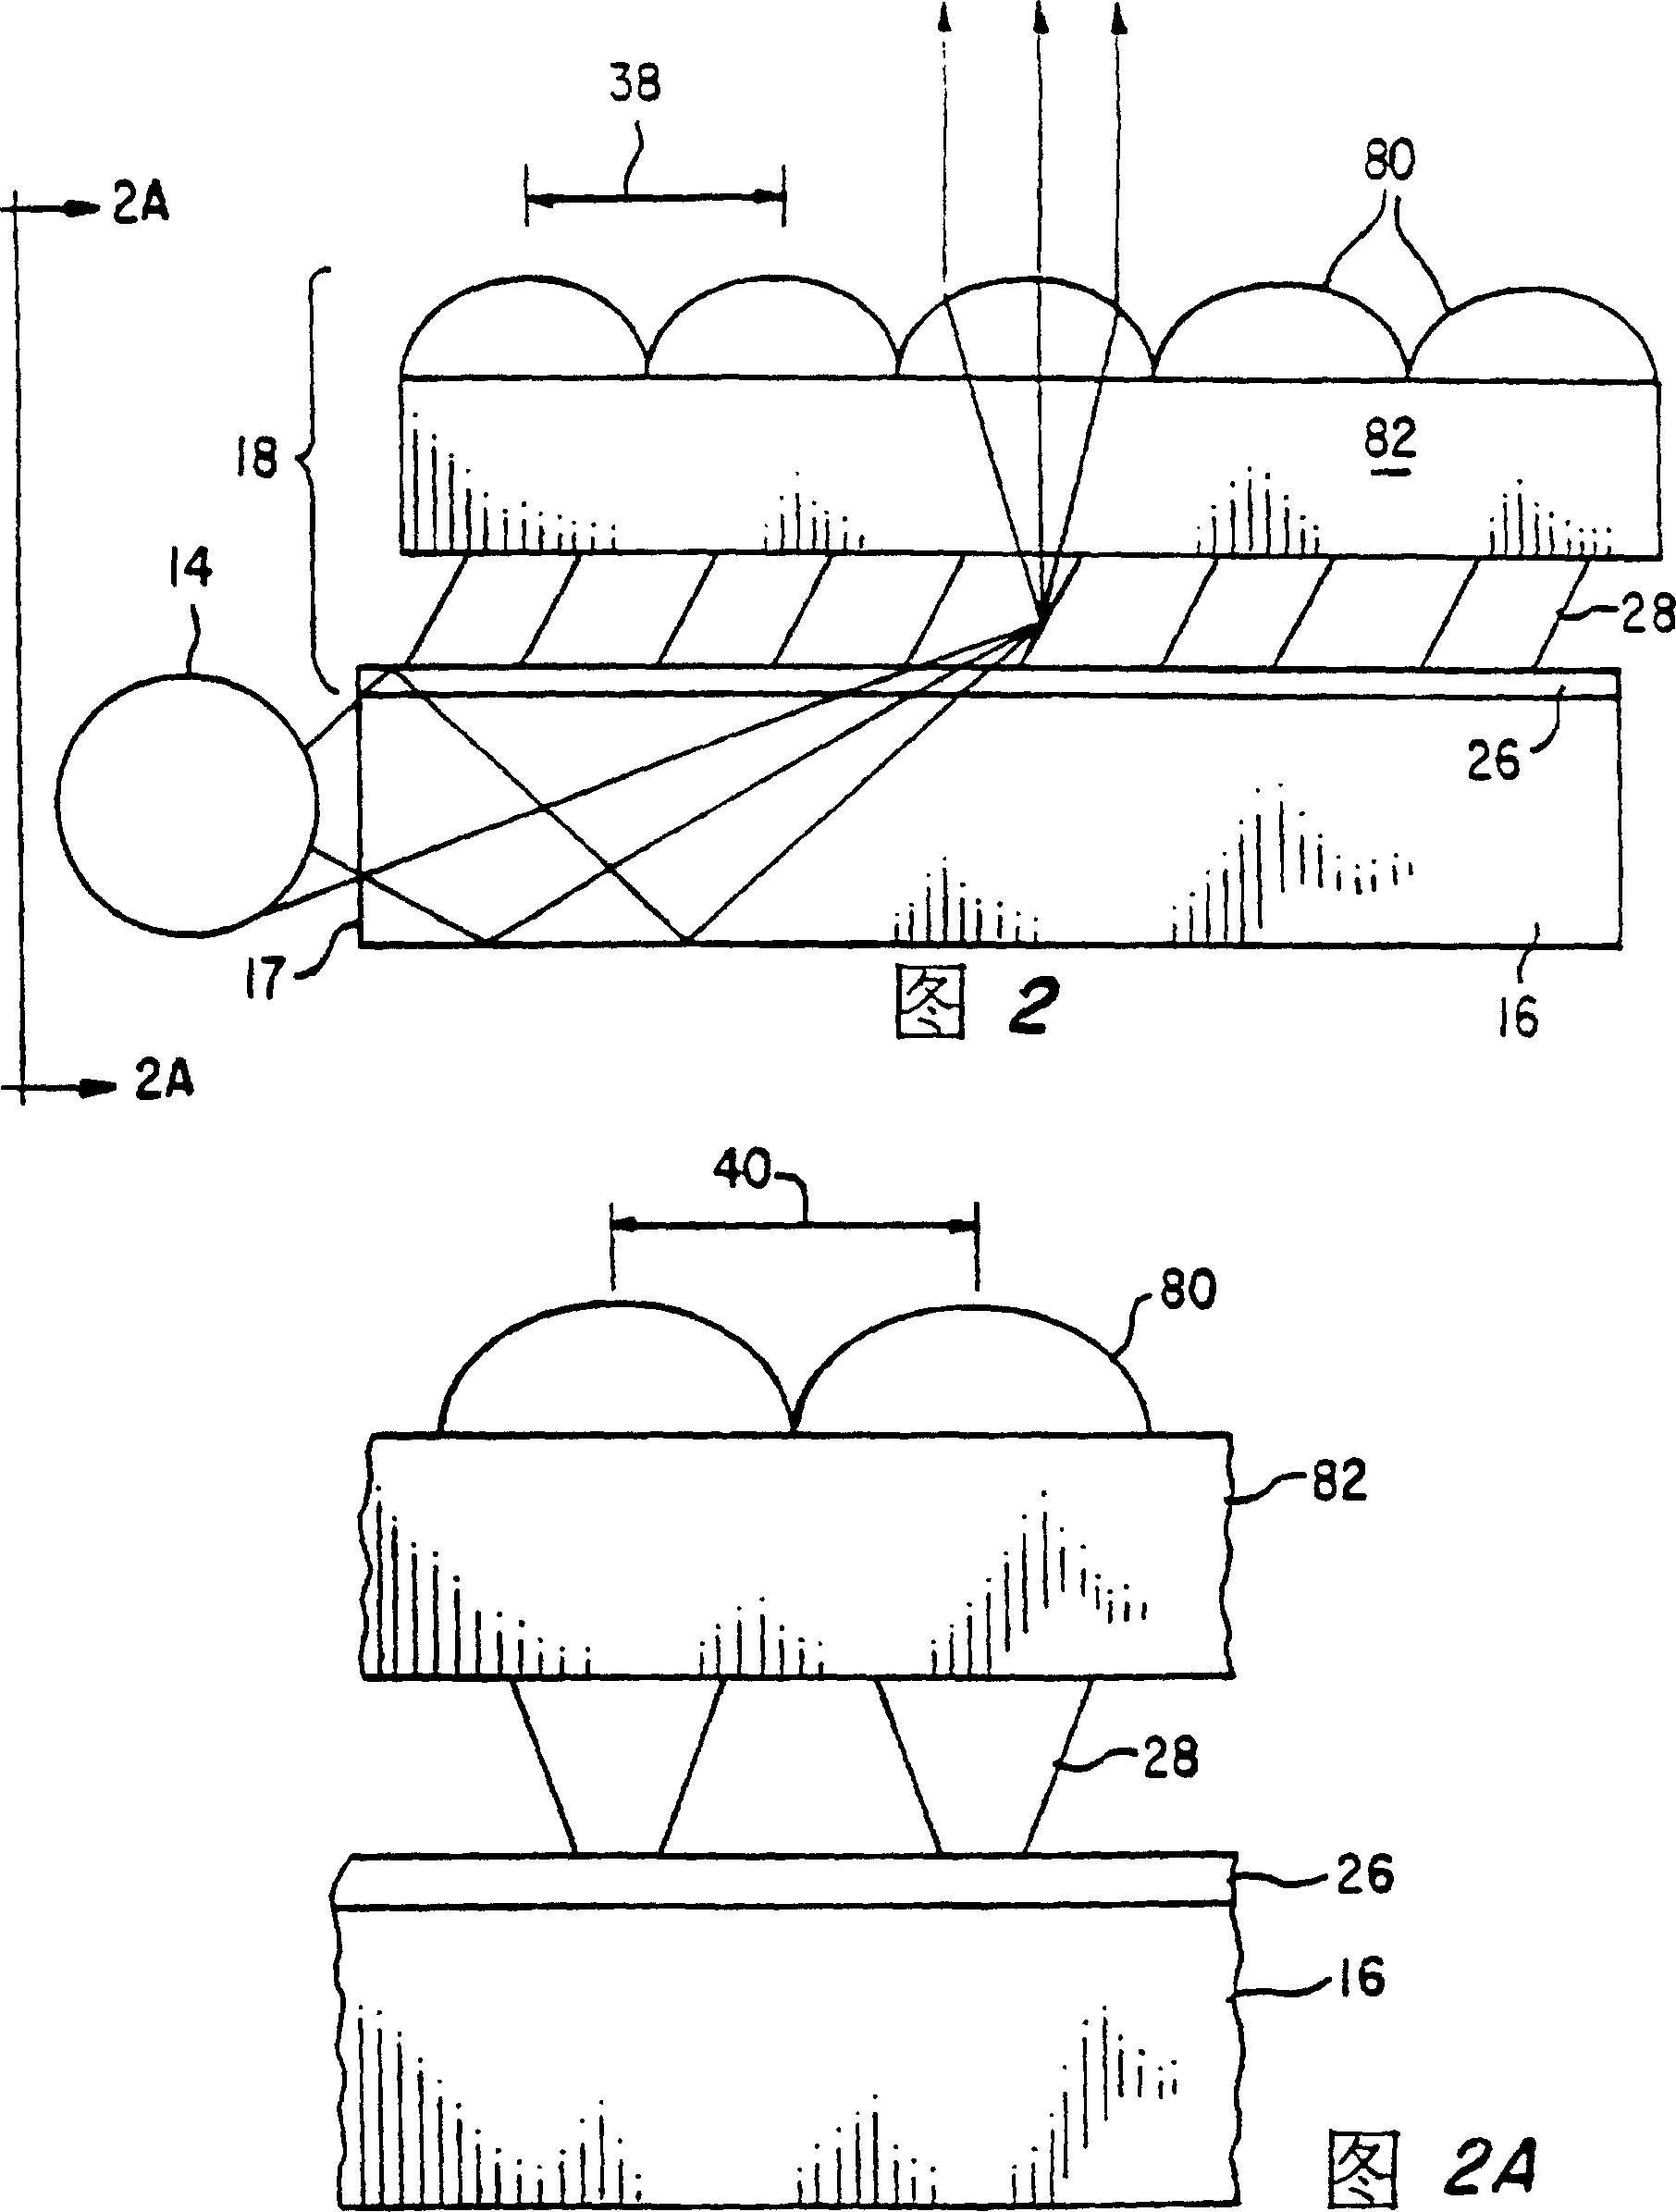 Illumination system employing array of microprisms